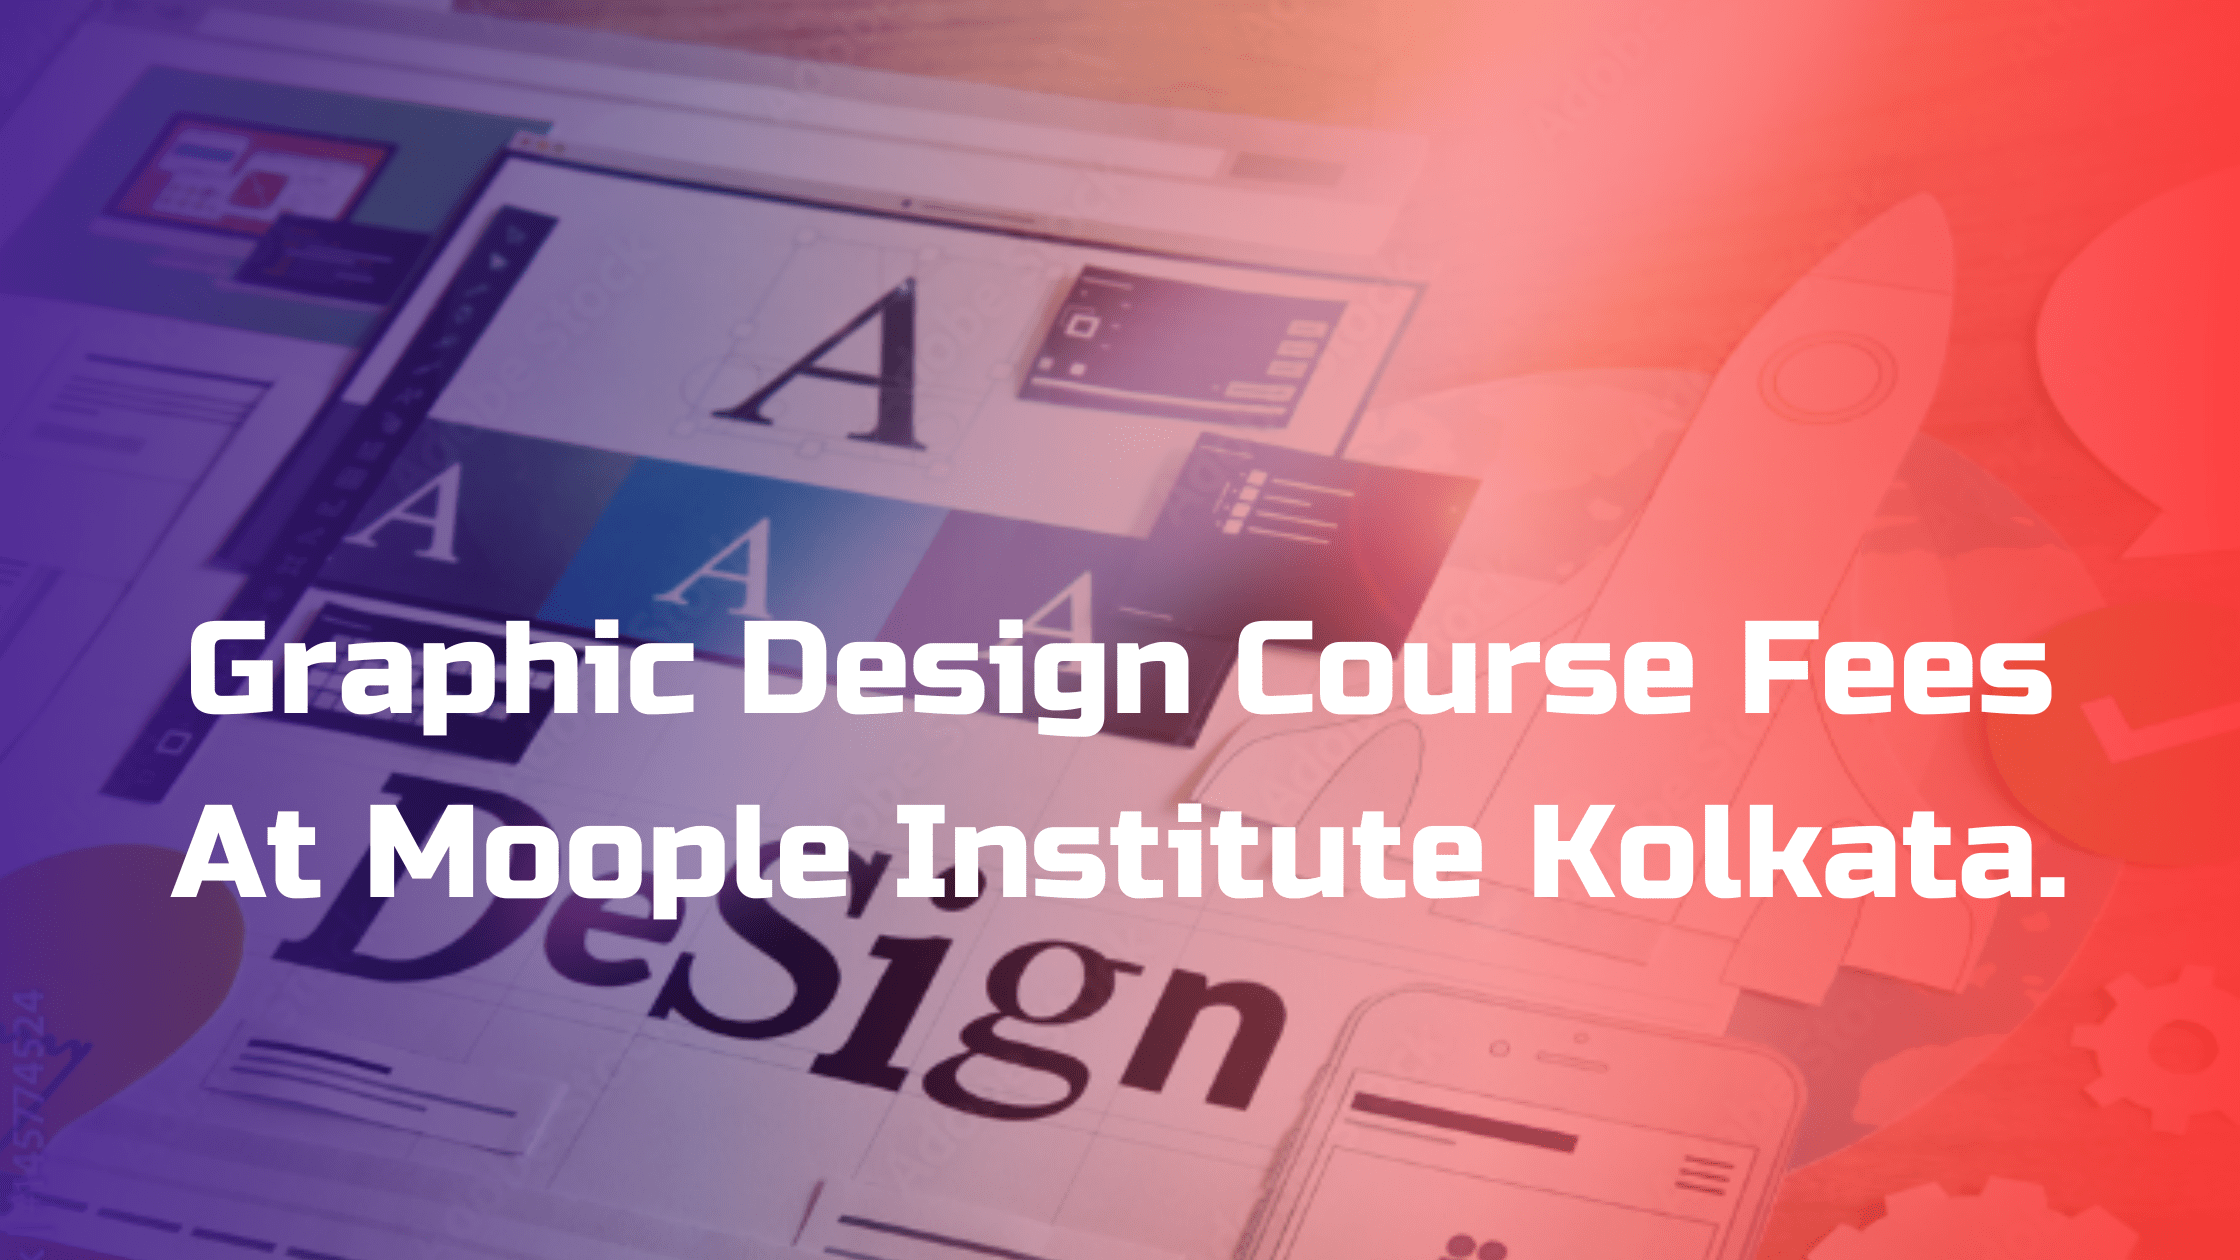 Graphic design course fees in Moople Institute